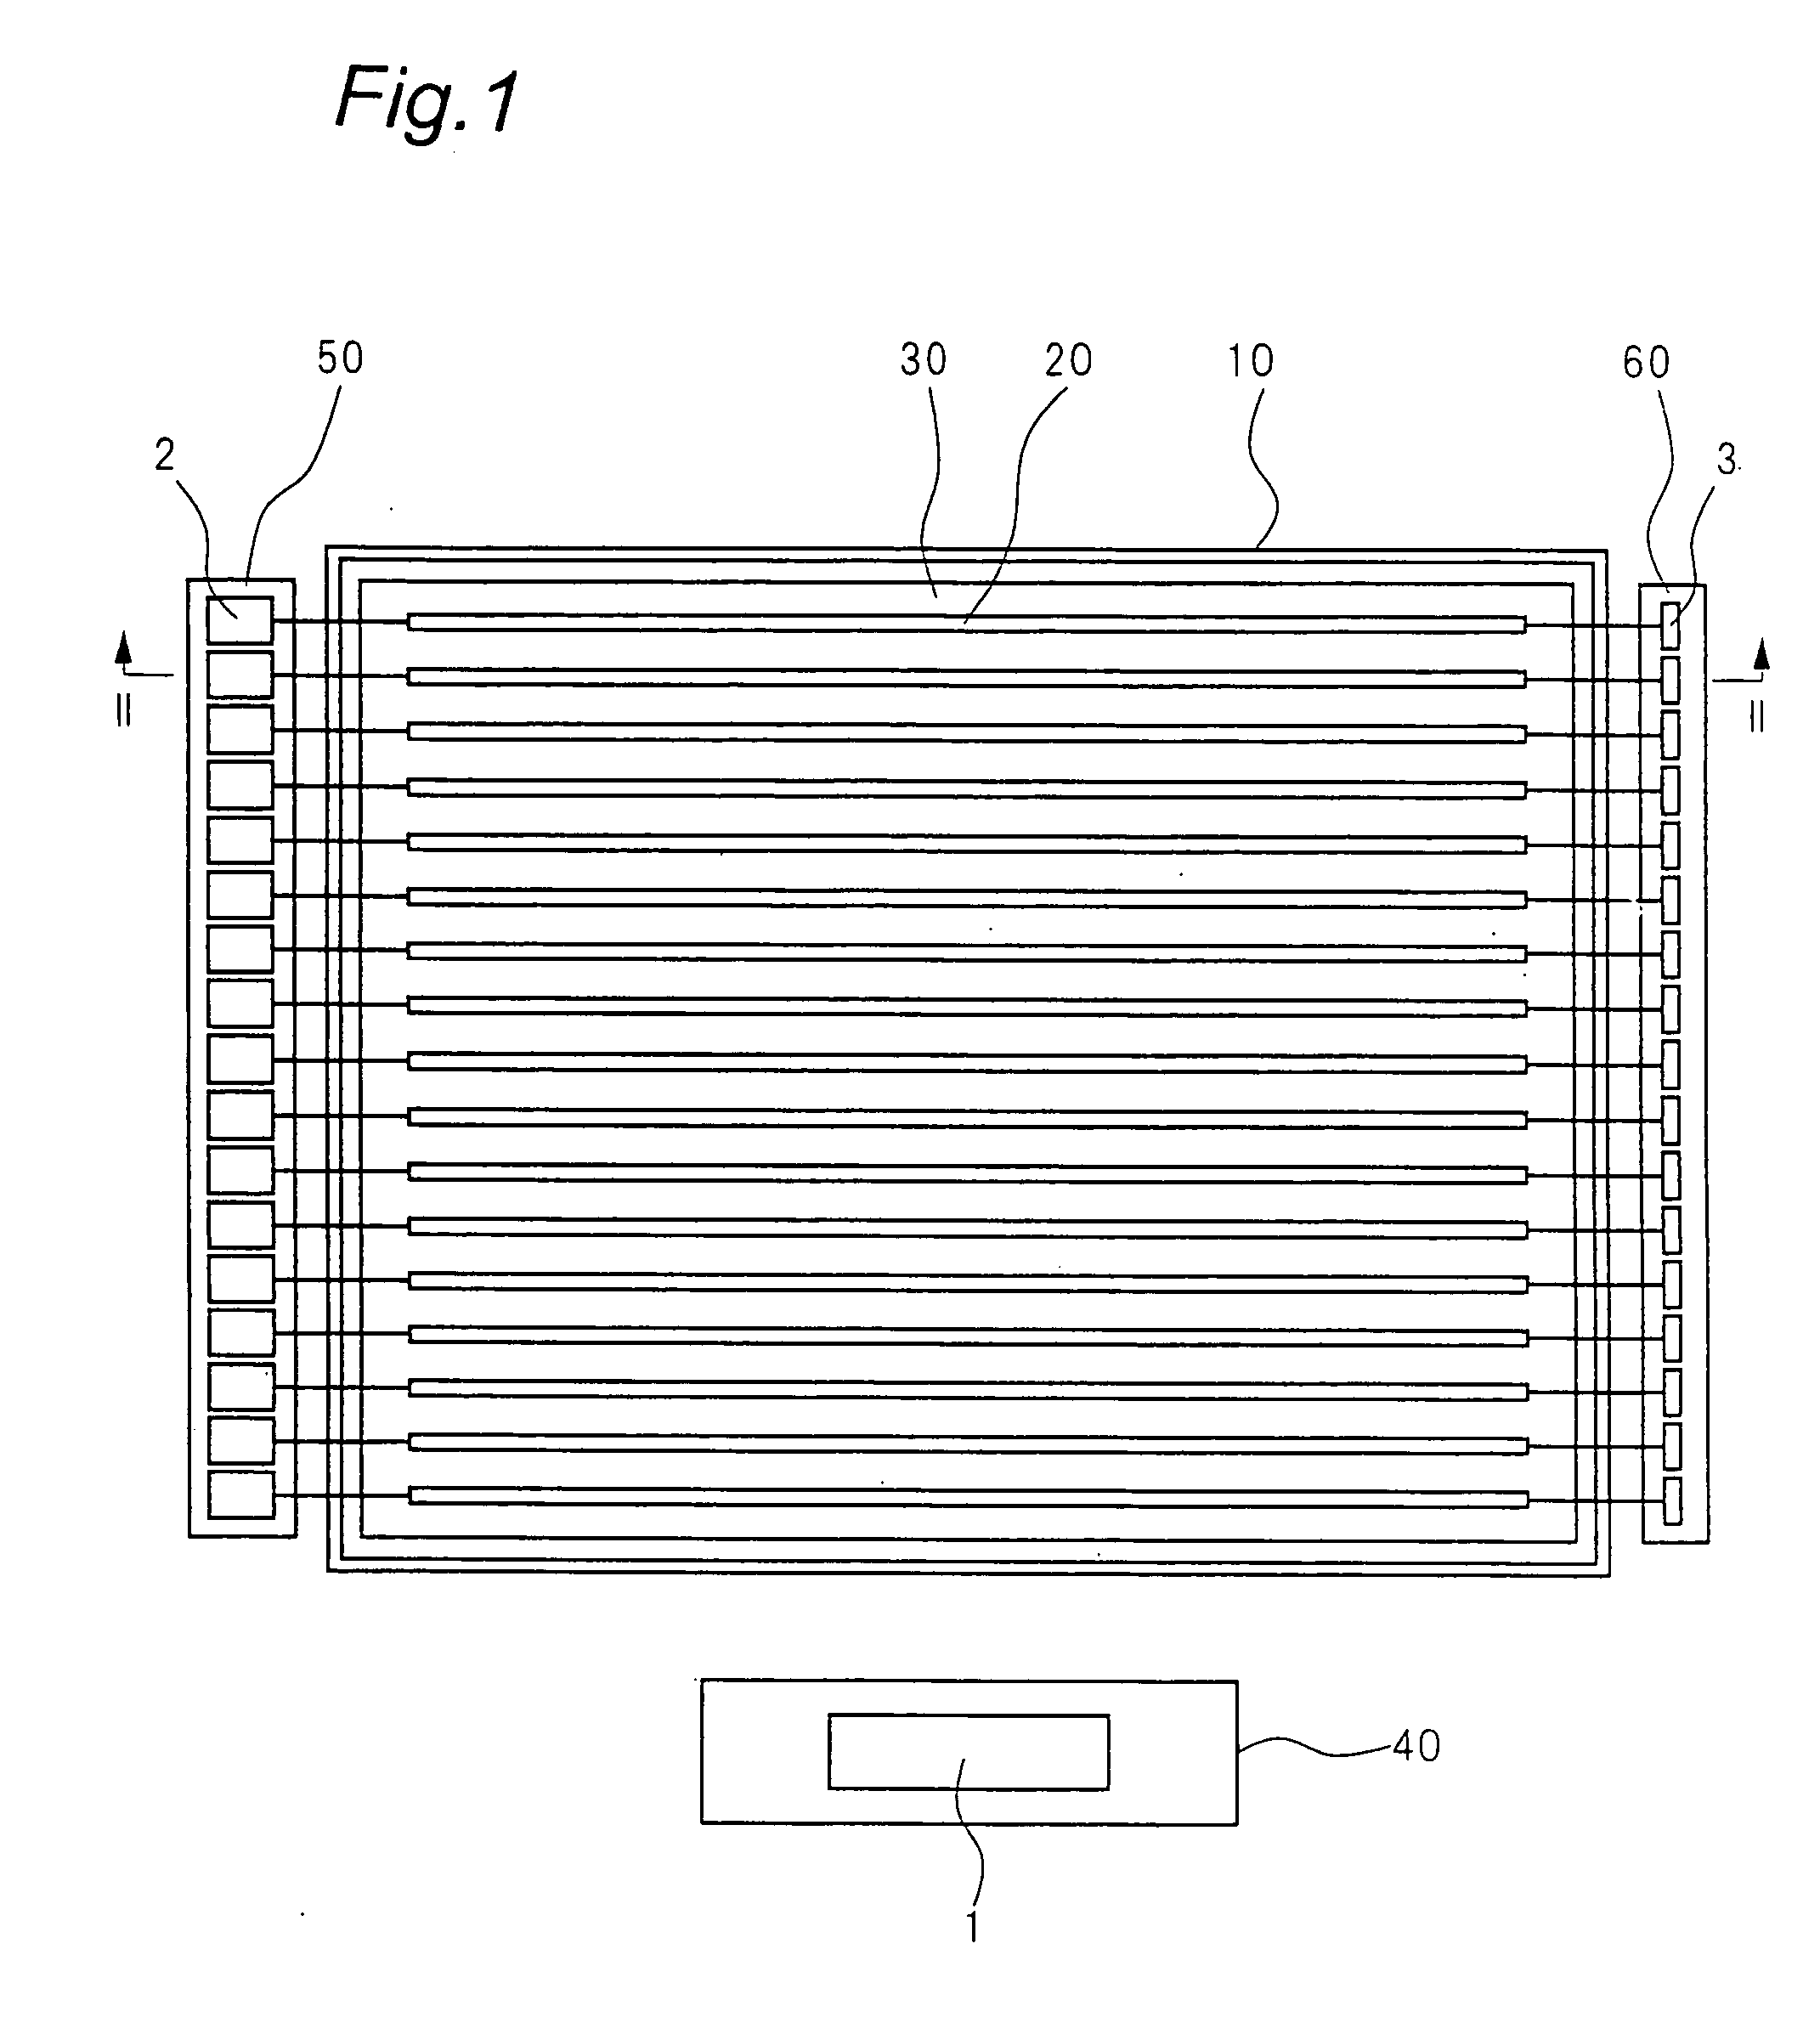 Cold-cathode tube lighting device for use in a plurality of cold-cathode tubes lit by two low-impedance power sources